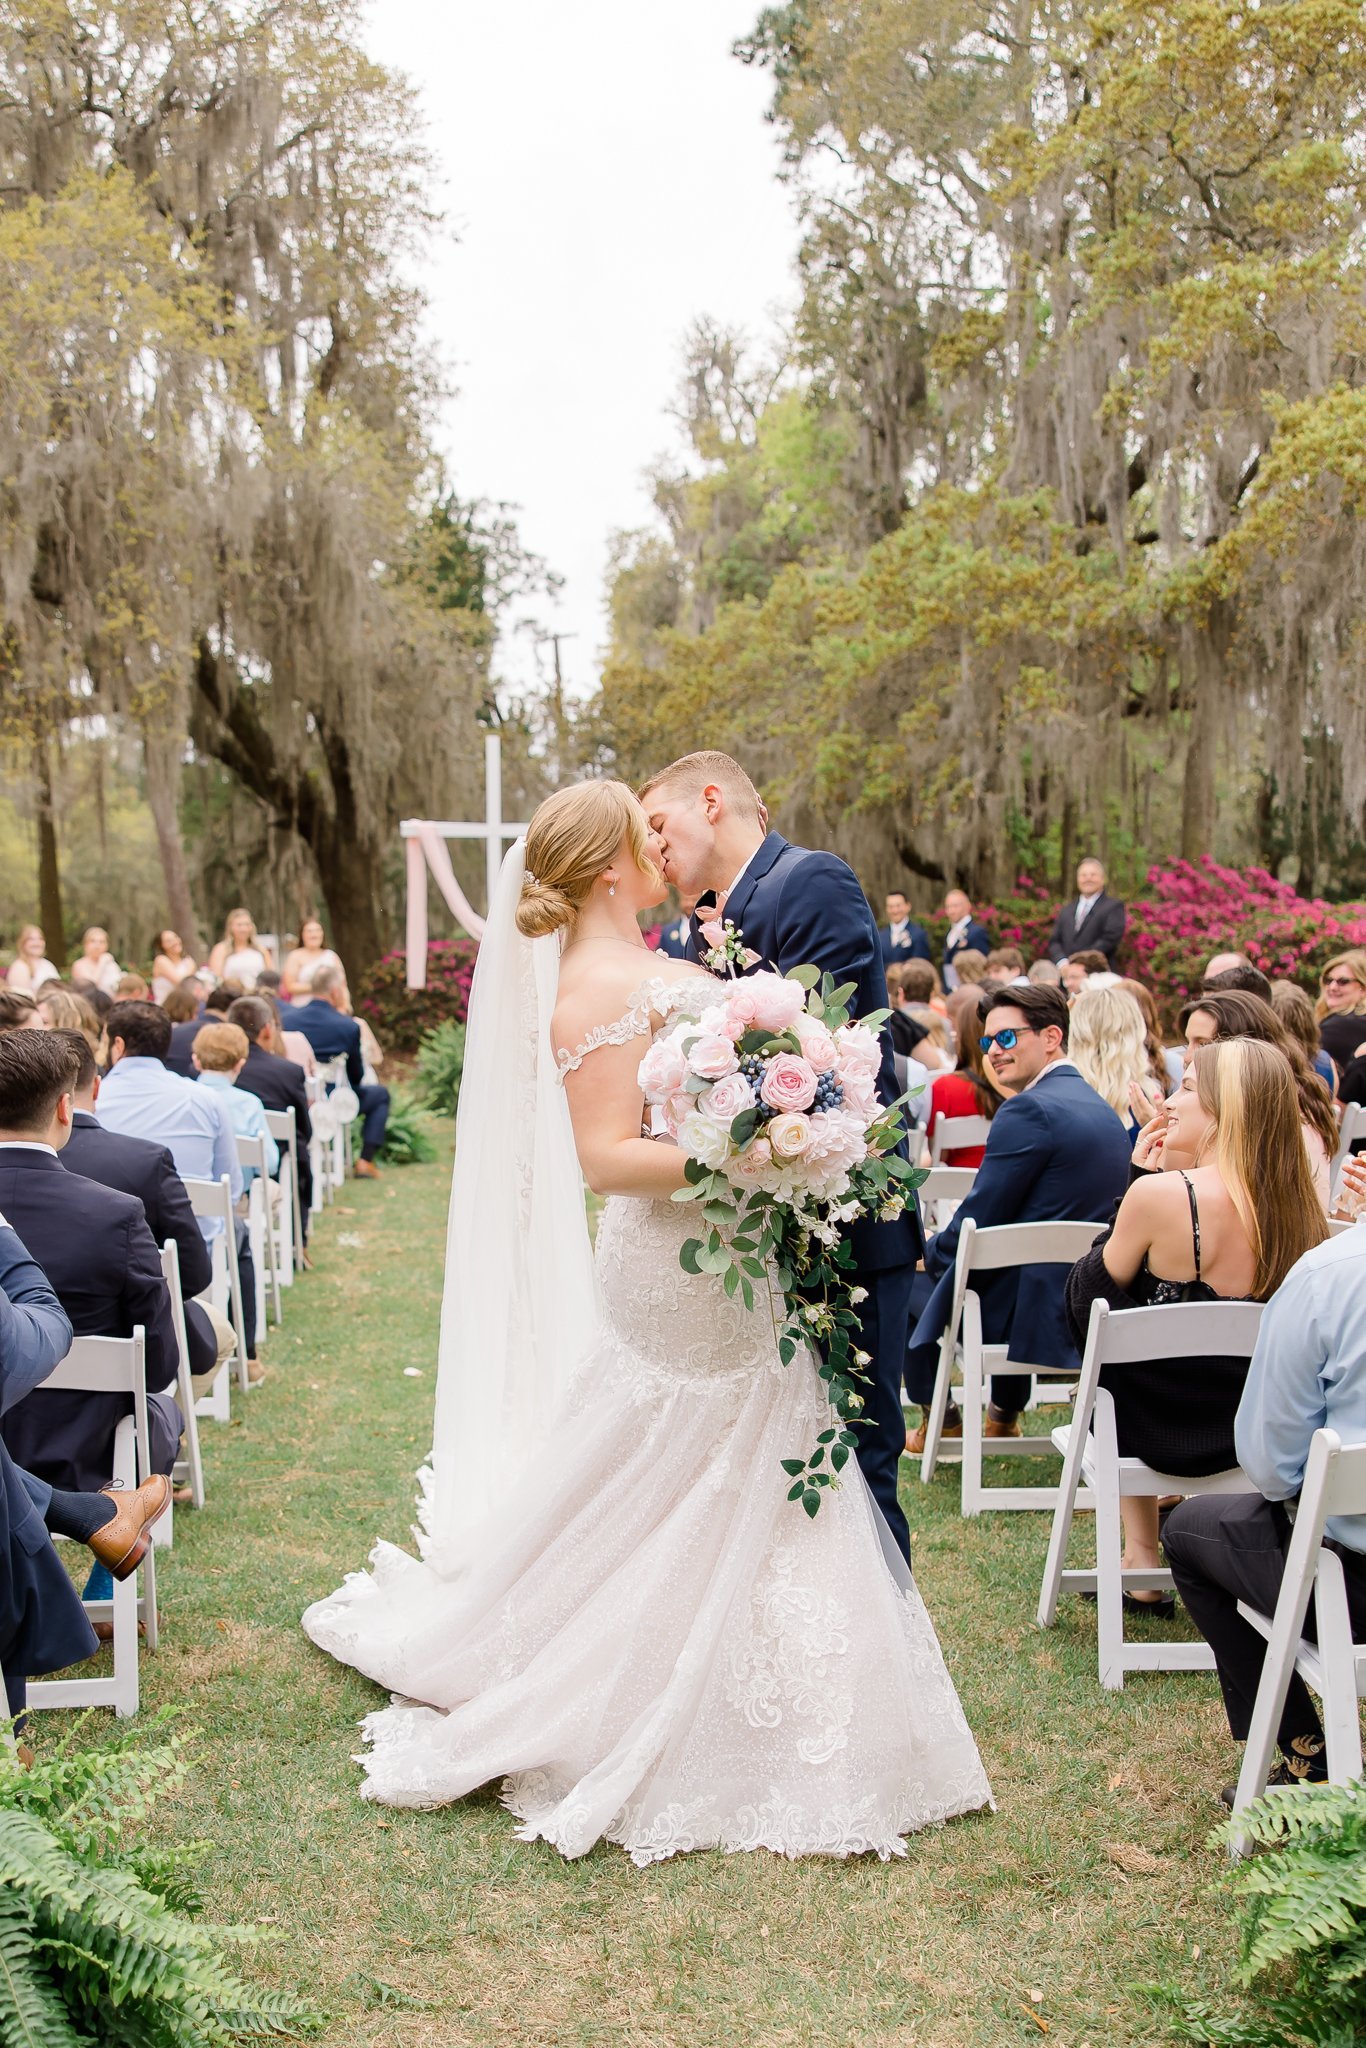 ivory-and-beau-blog-real-bride-down-for-the-gown-taylor-savannah-bride-maggie-sottero-wedding-dress-savannah-bridal-shop-savannah-bridal-boutique-mermaid-wedding-dress-savannah-georgia-EMP_LR_462.jpg